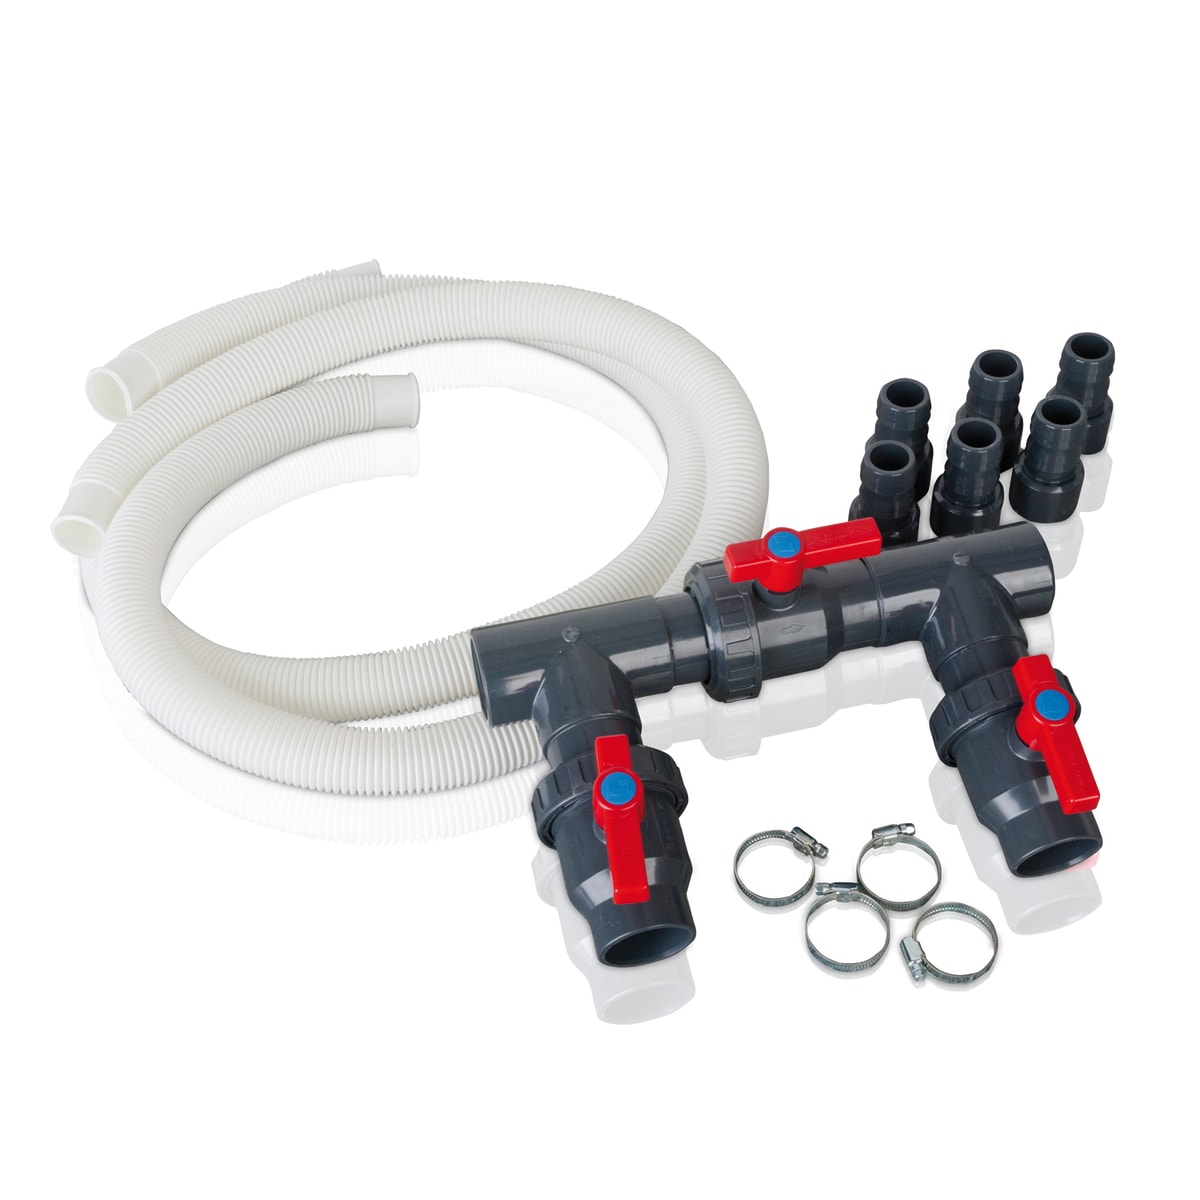 BYPASS KIT 3 OPENING AND CLOSING VALVES WITH 2 FLEXIBLE PIPES